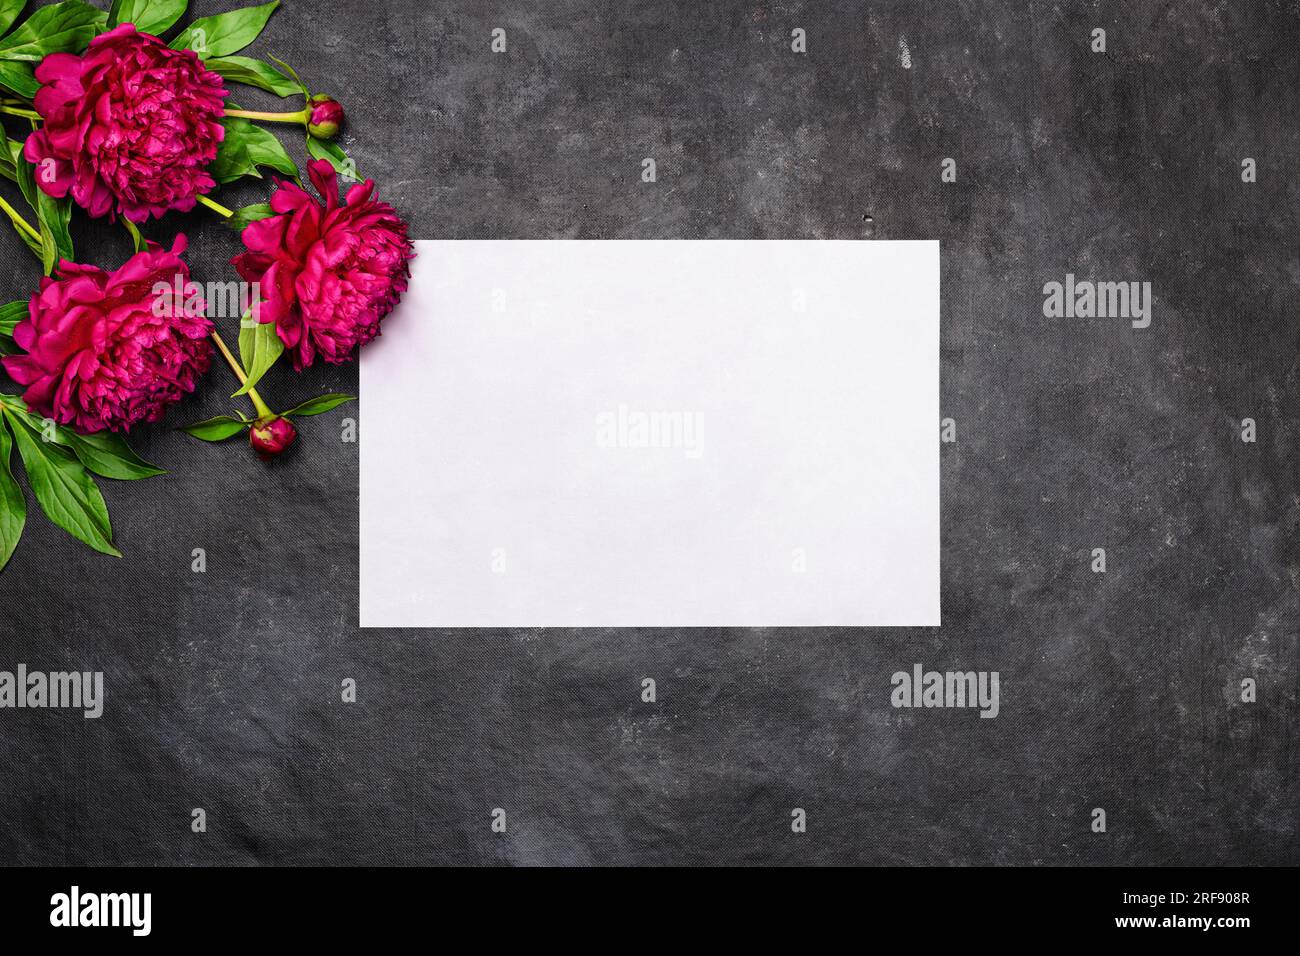 Greeting card with red peonies flowers and blank white paper on dark background, flat lay, top view. Holiday concept with copy space for text for your Stock Photo